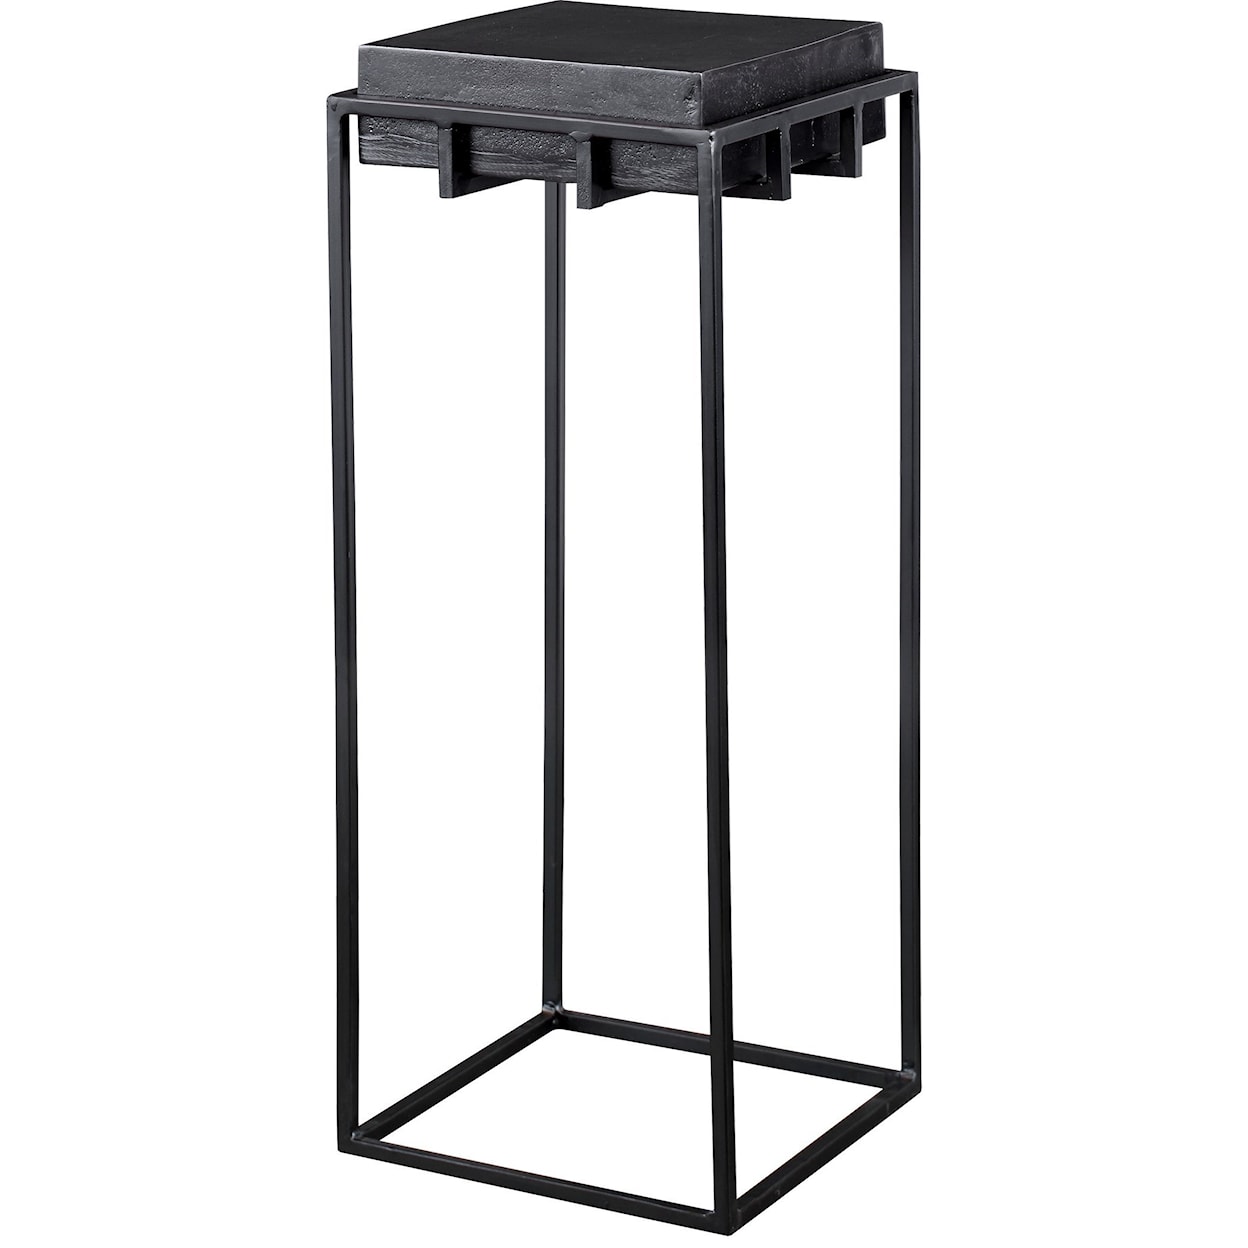 Uttermost Accent Furniture - Occasional Tables Telone Black Small Pedestal